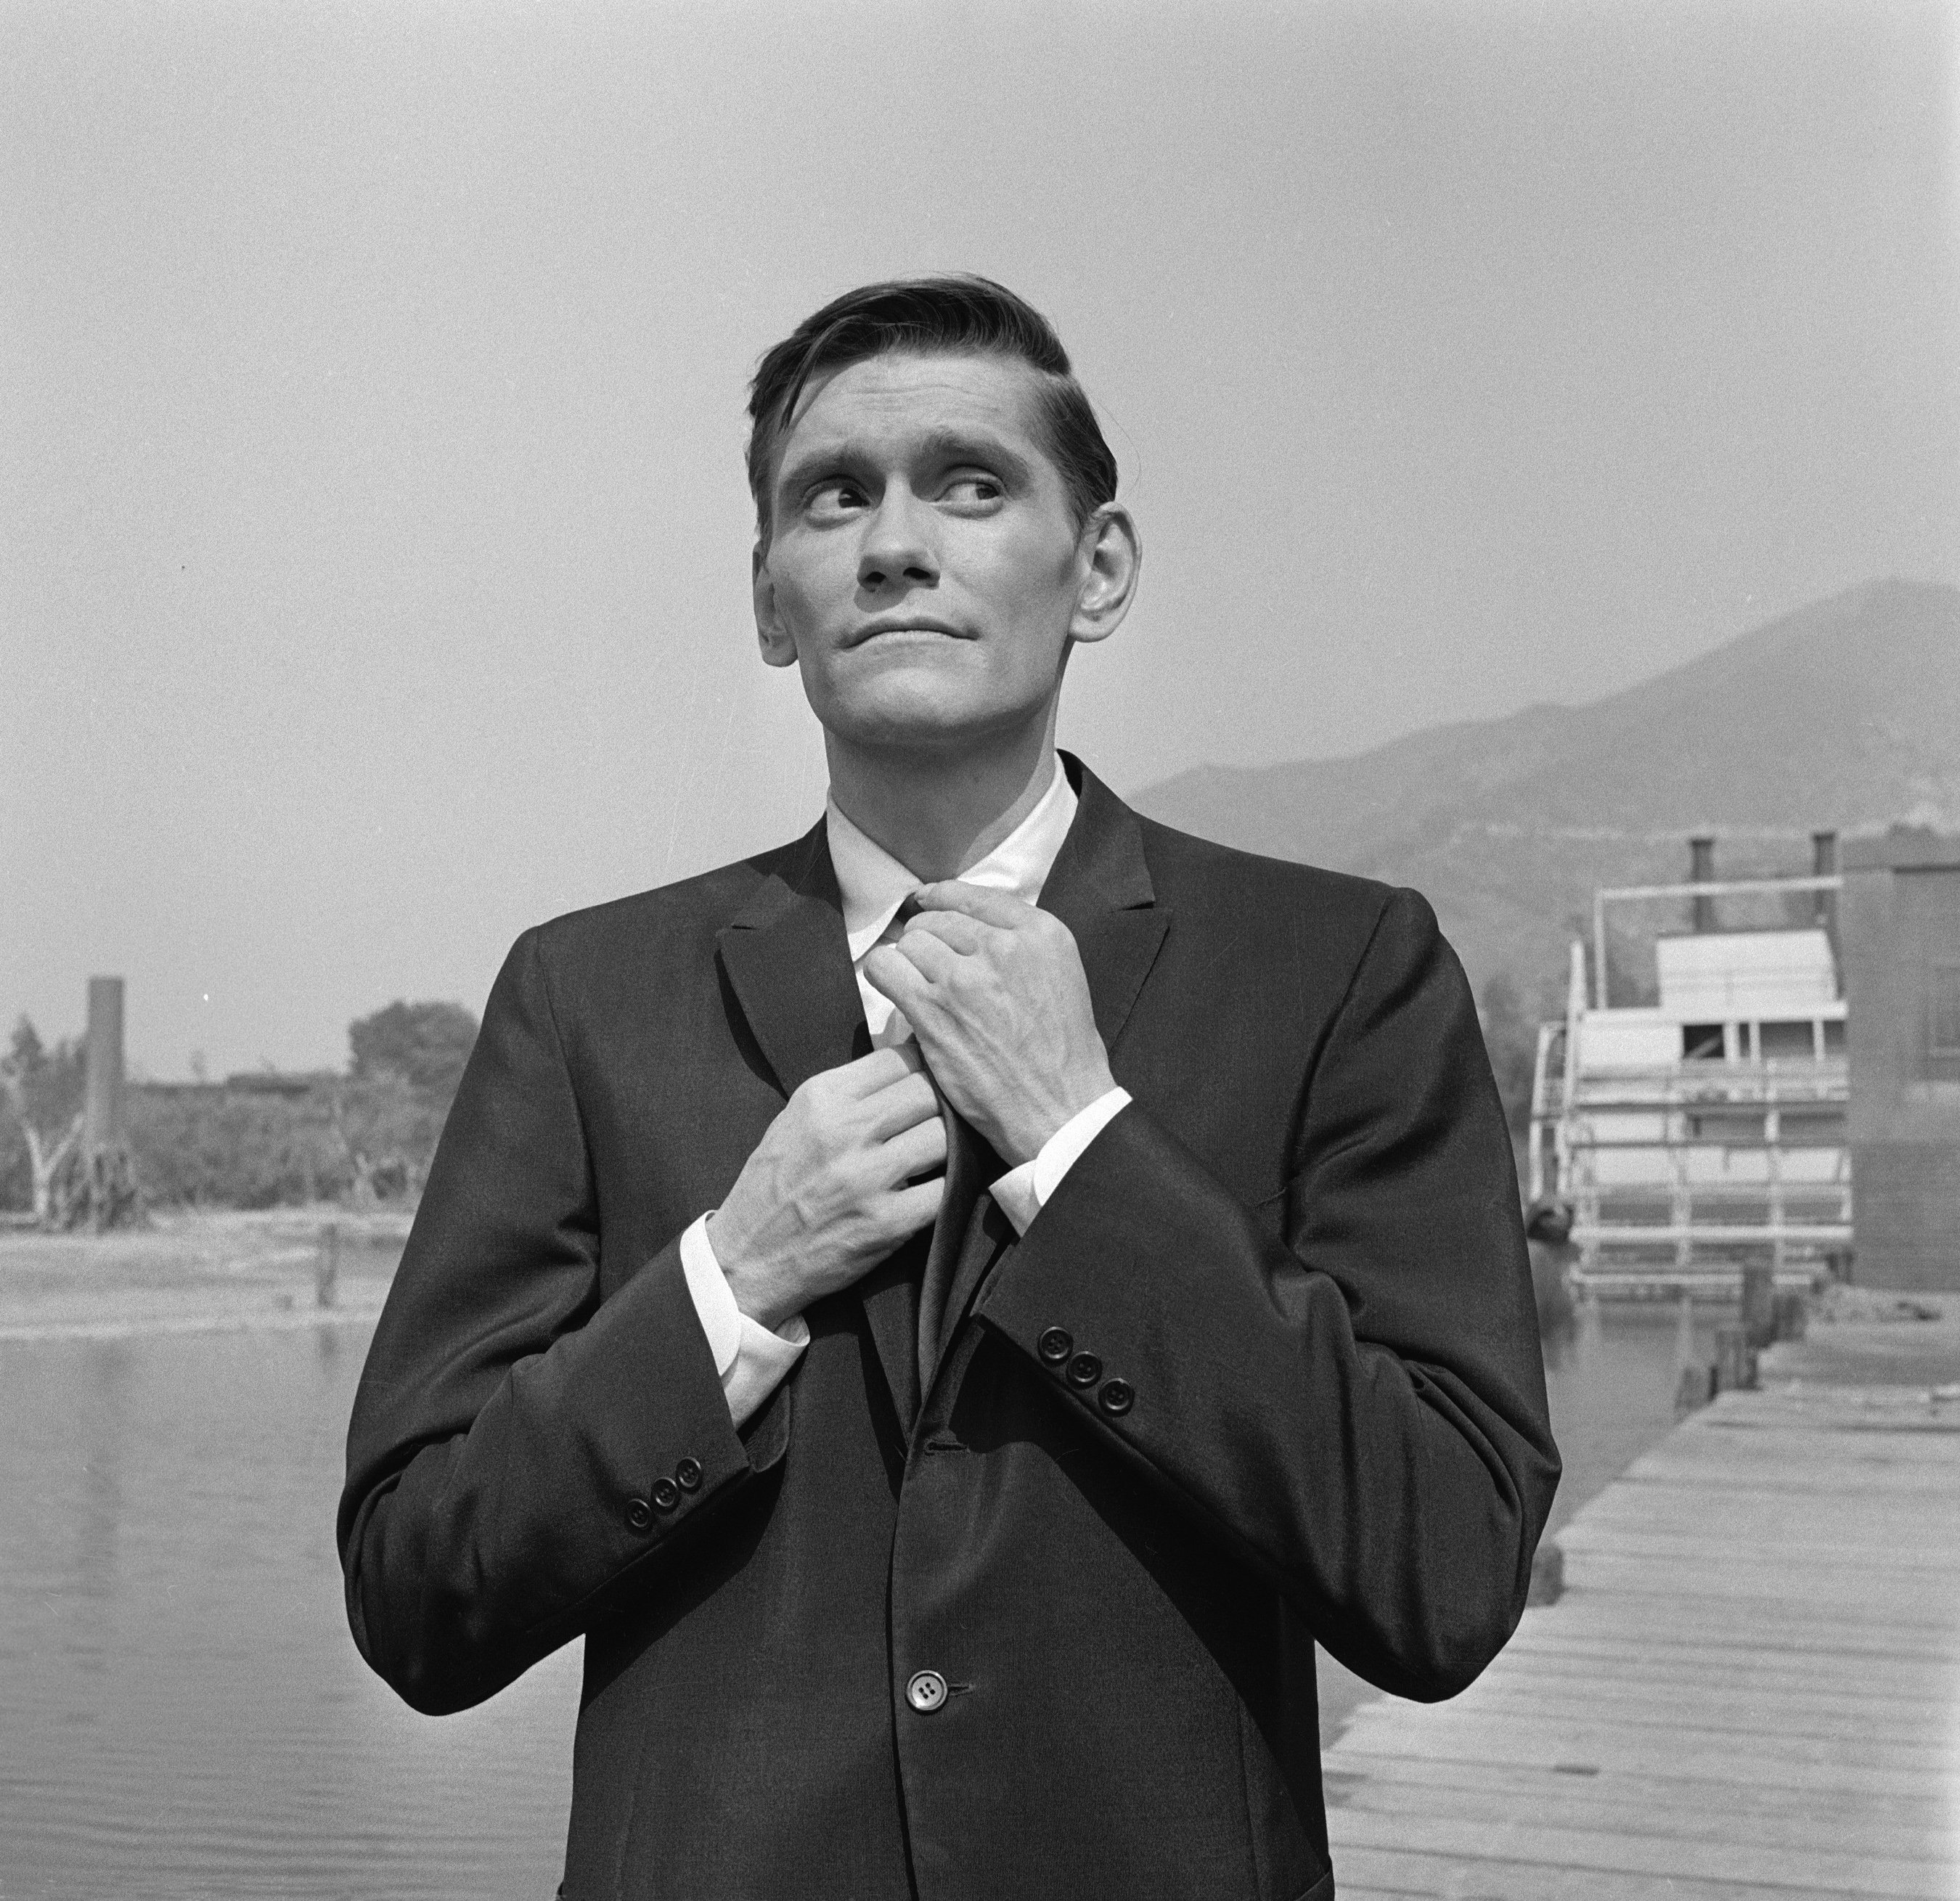 American actor Dick York adjusts his necktie as he stands on a wooden dock during the filming of an episode of the television anthology series "The Alfred Hitchcock Presents" entitled "The Blessington Method," on September 3, 1959 | Photo: Getty Images